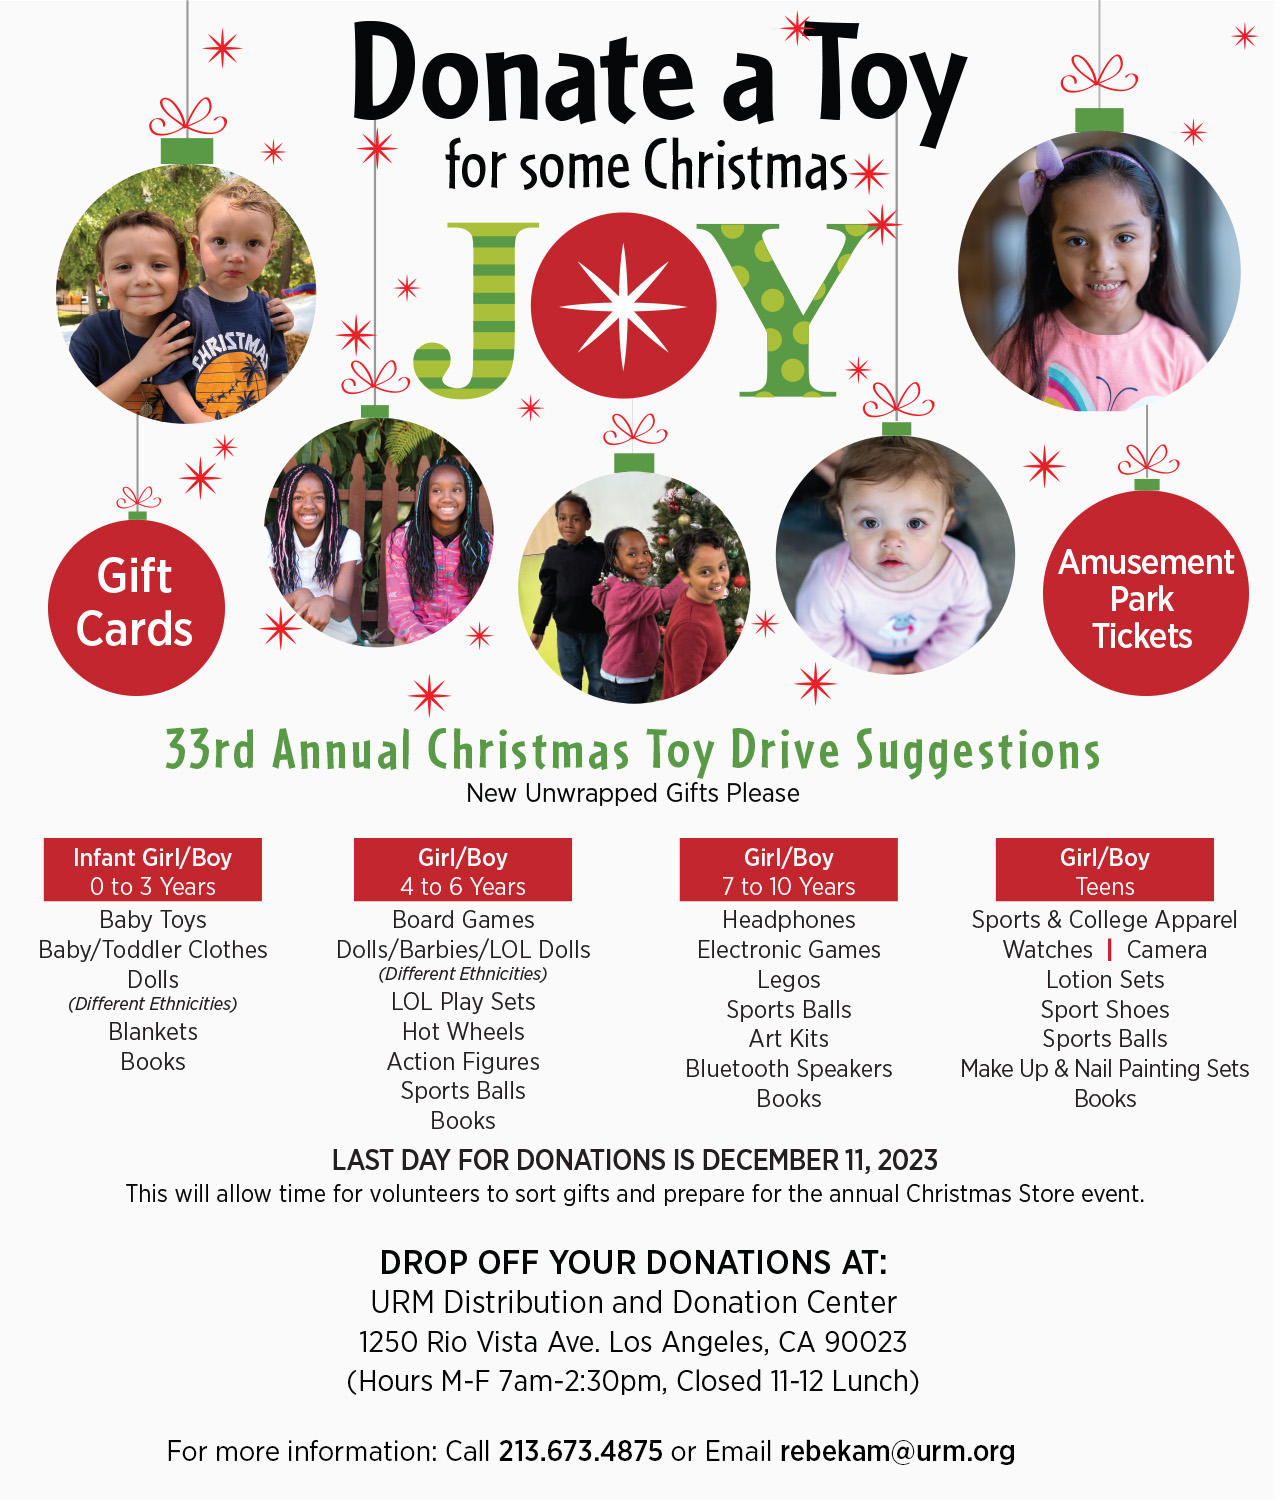 Toy Donation web page layout